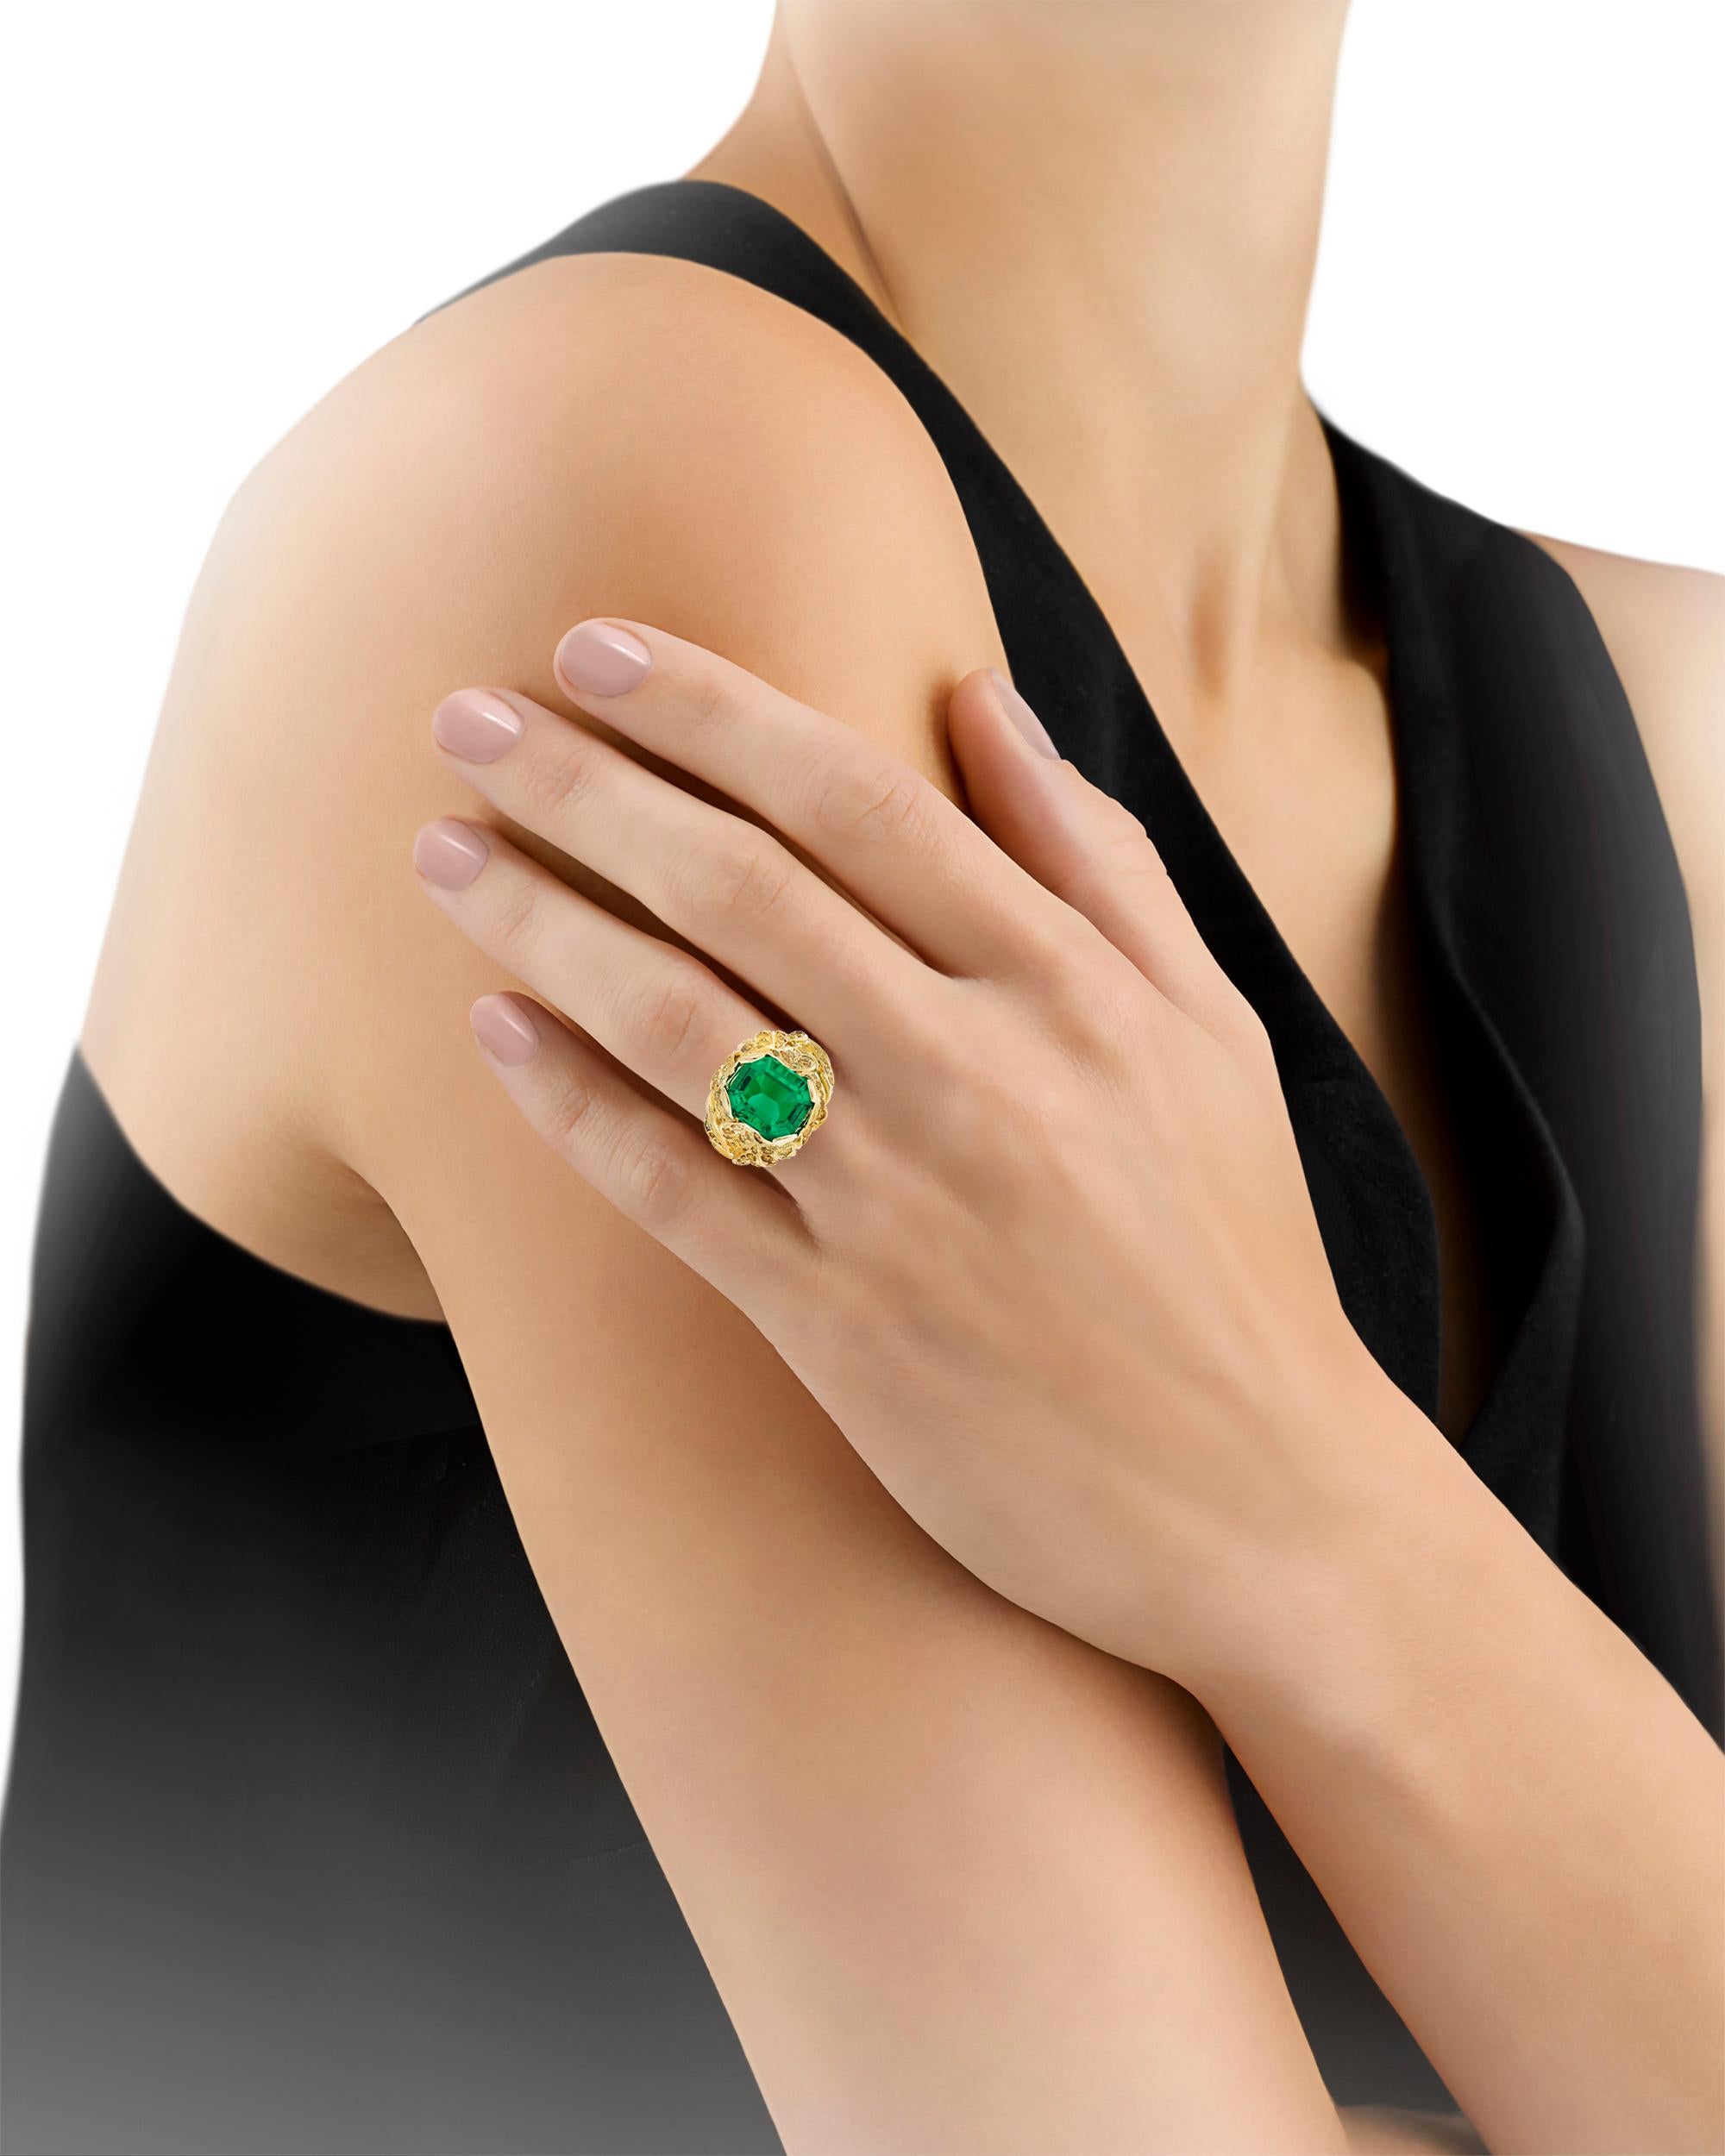 Retro Fred Leighton Untreated 5.94 Carat Colombian Emerald Ring  